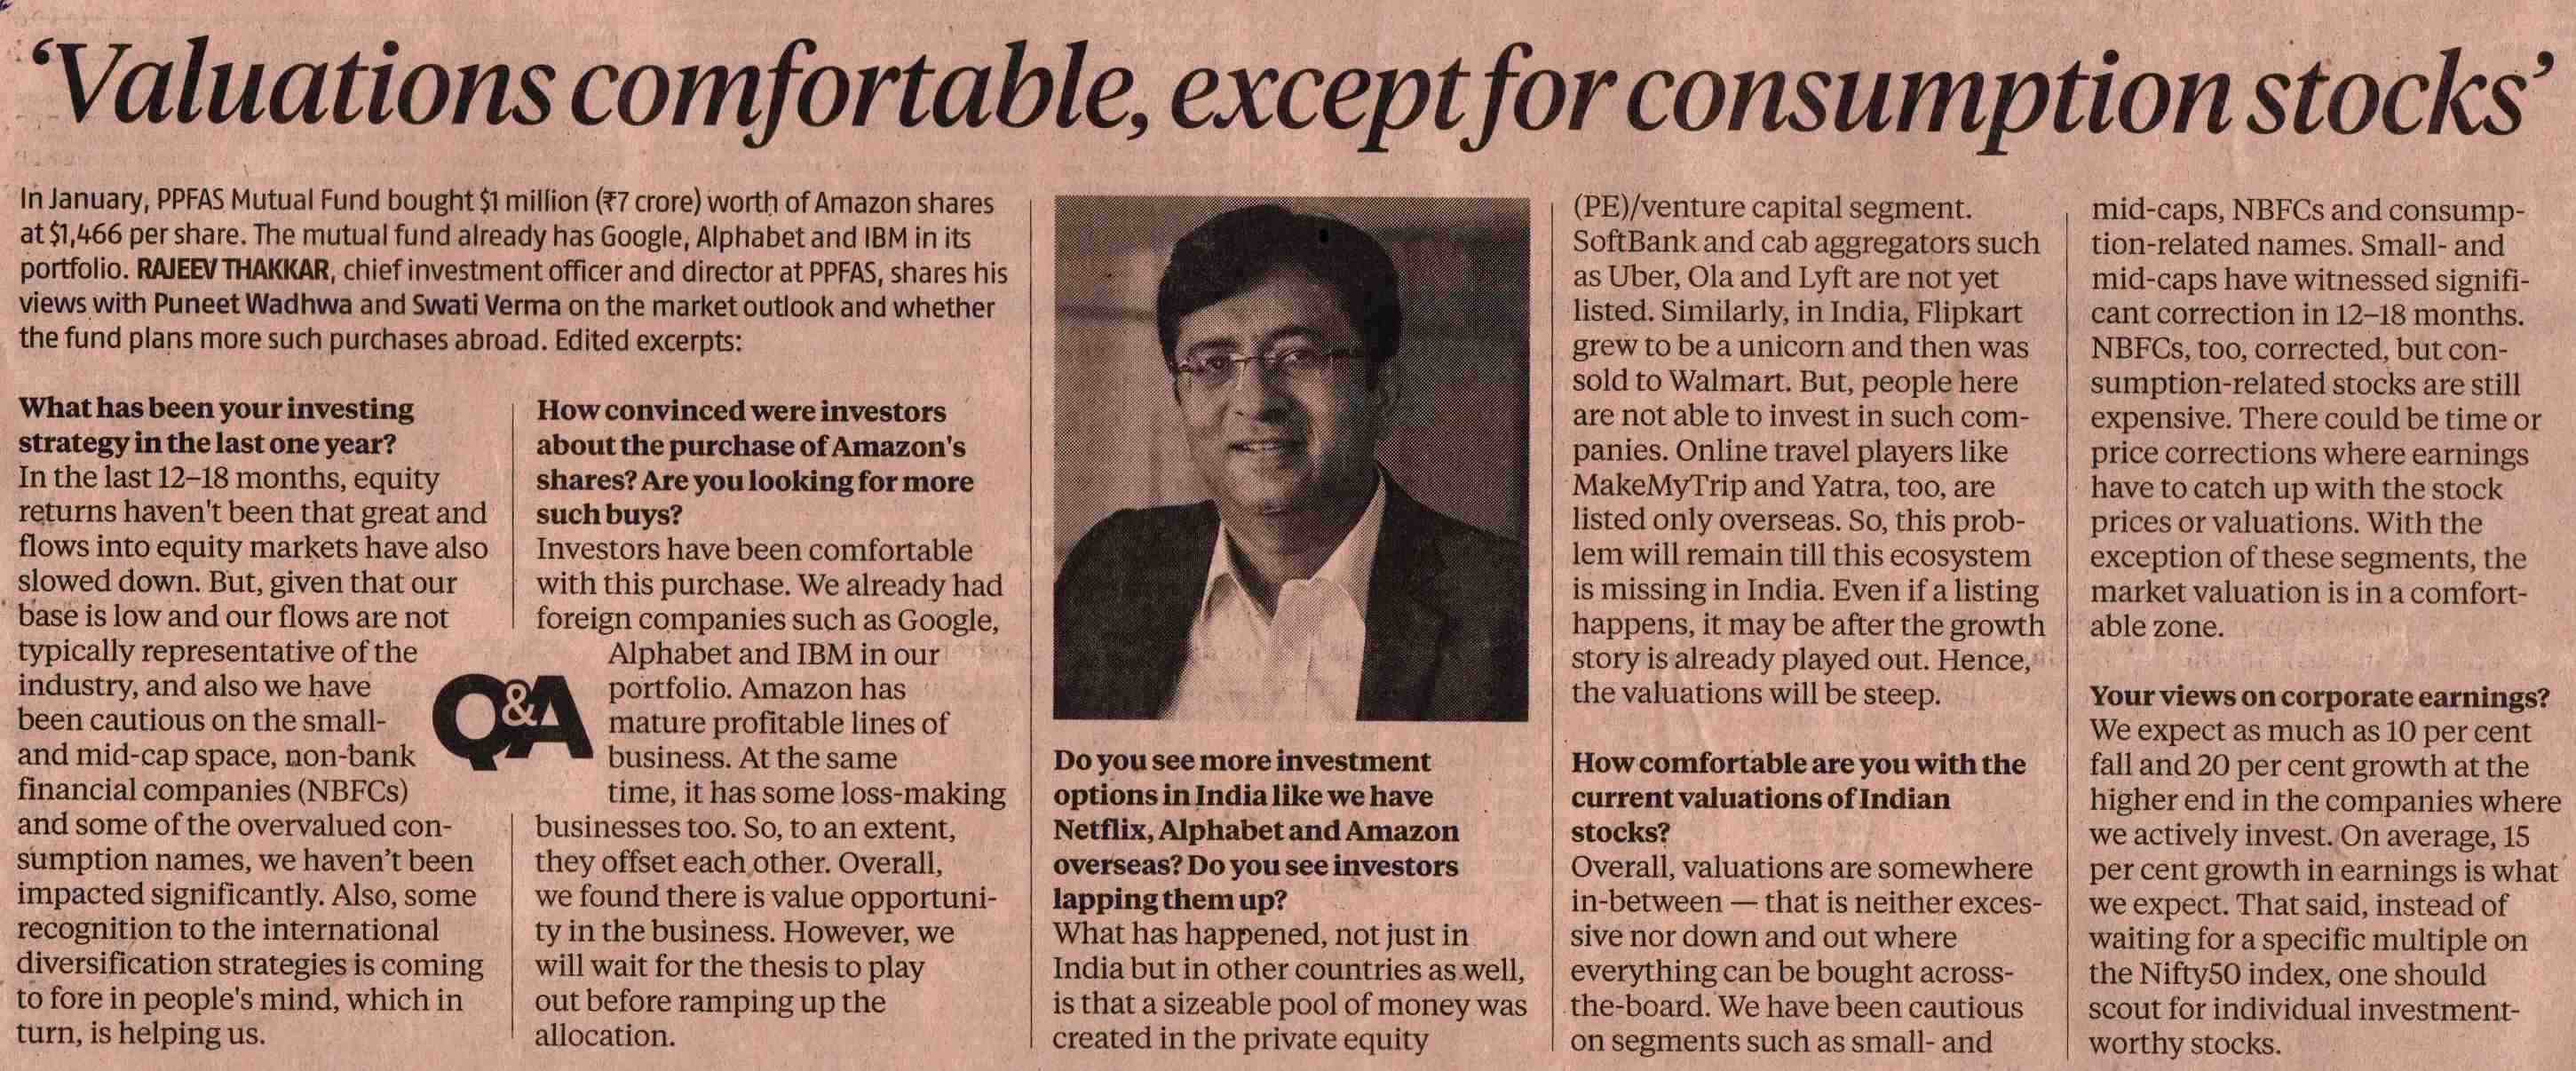 'Valuations comfortable, except for consumption stocks'